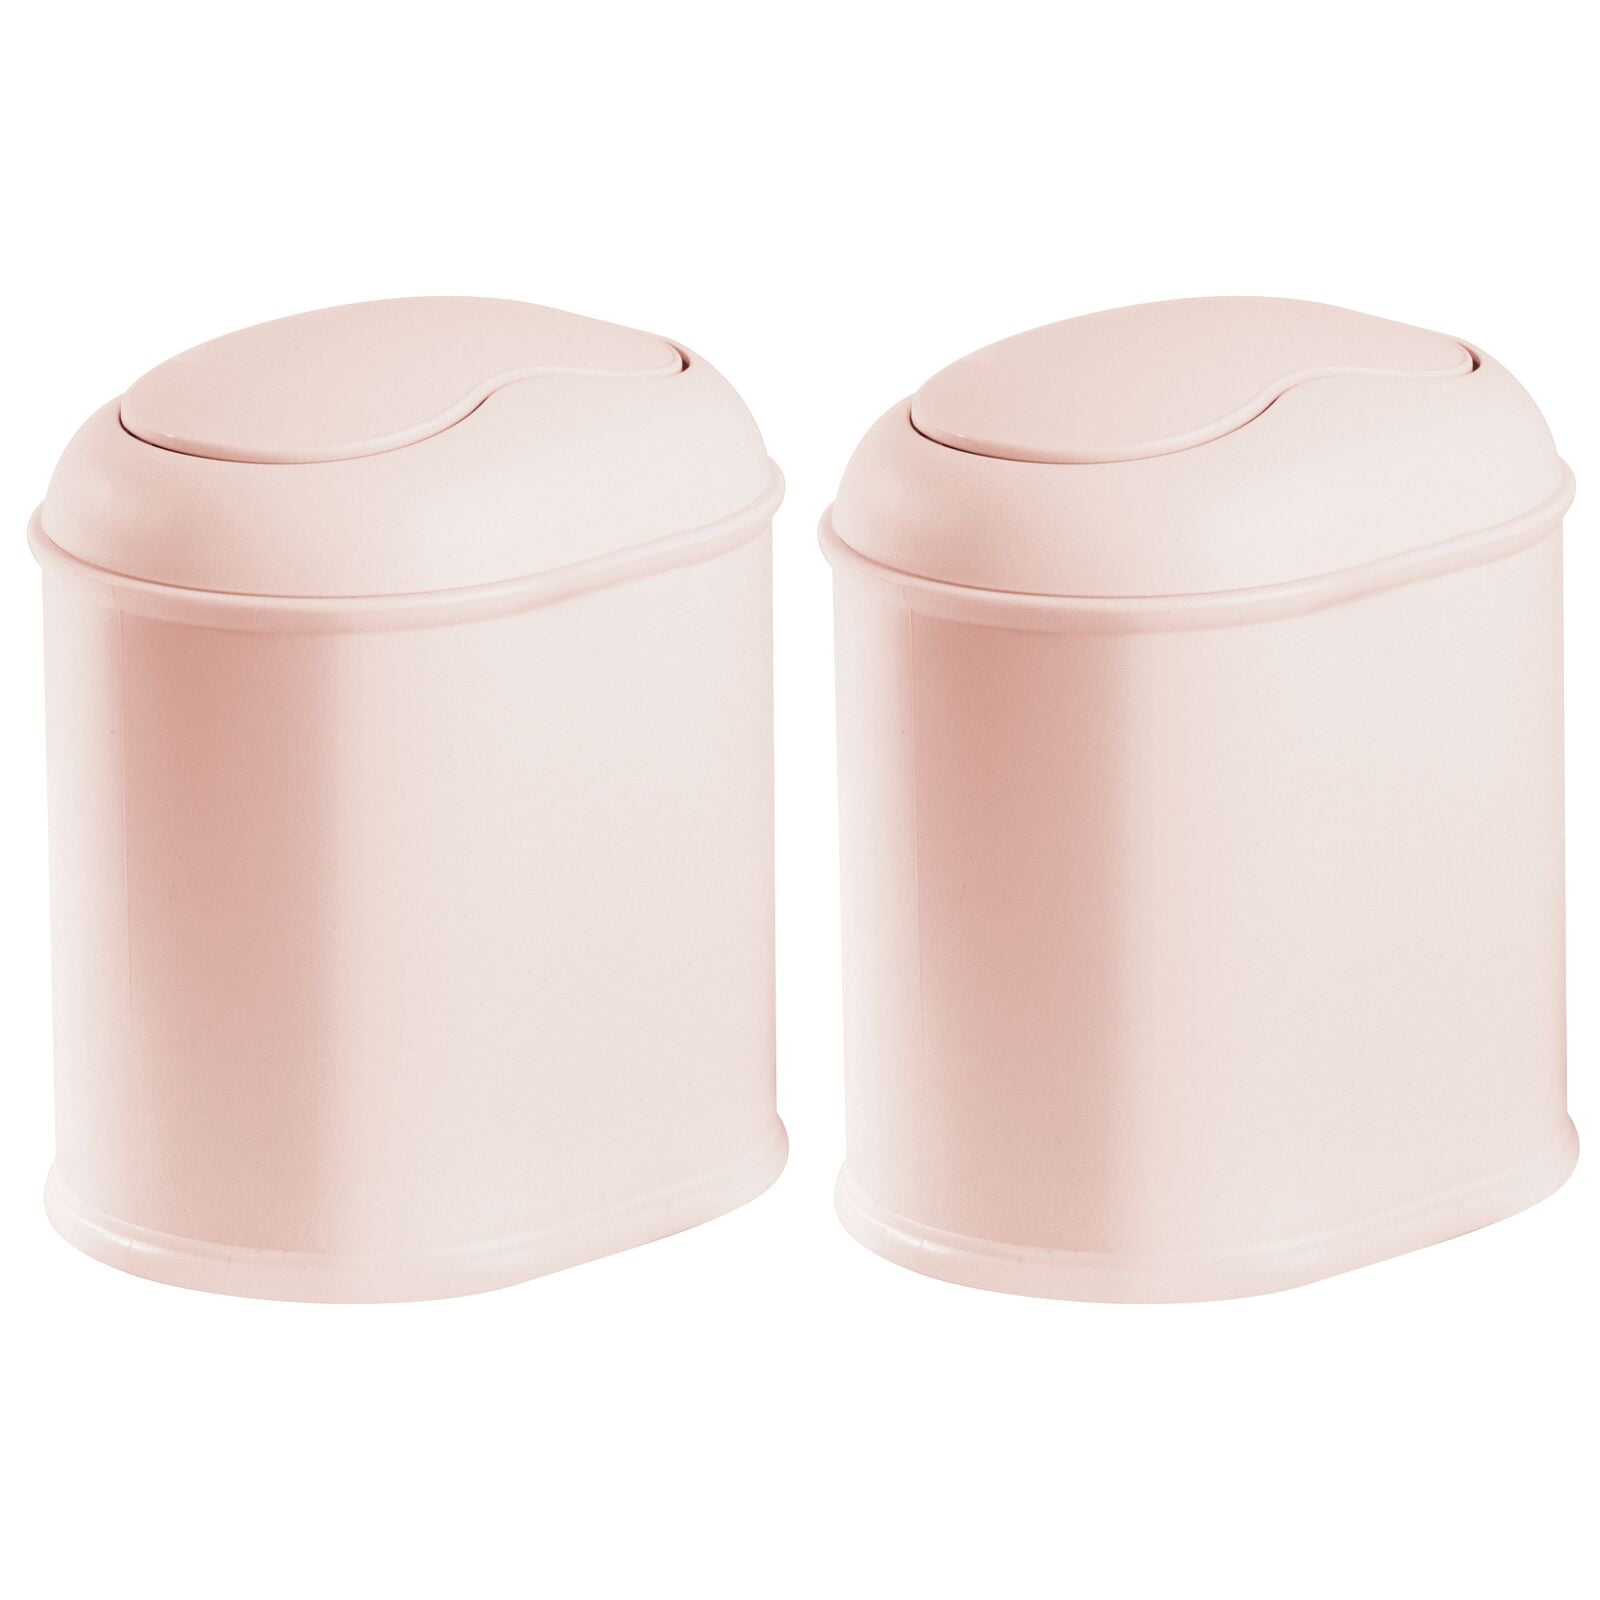 White/Rose Gold Swing Lid mDesign Plastic Small Round Trash Can Wastebasket 